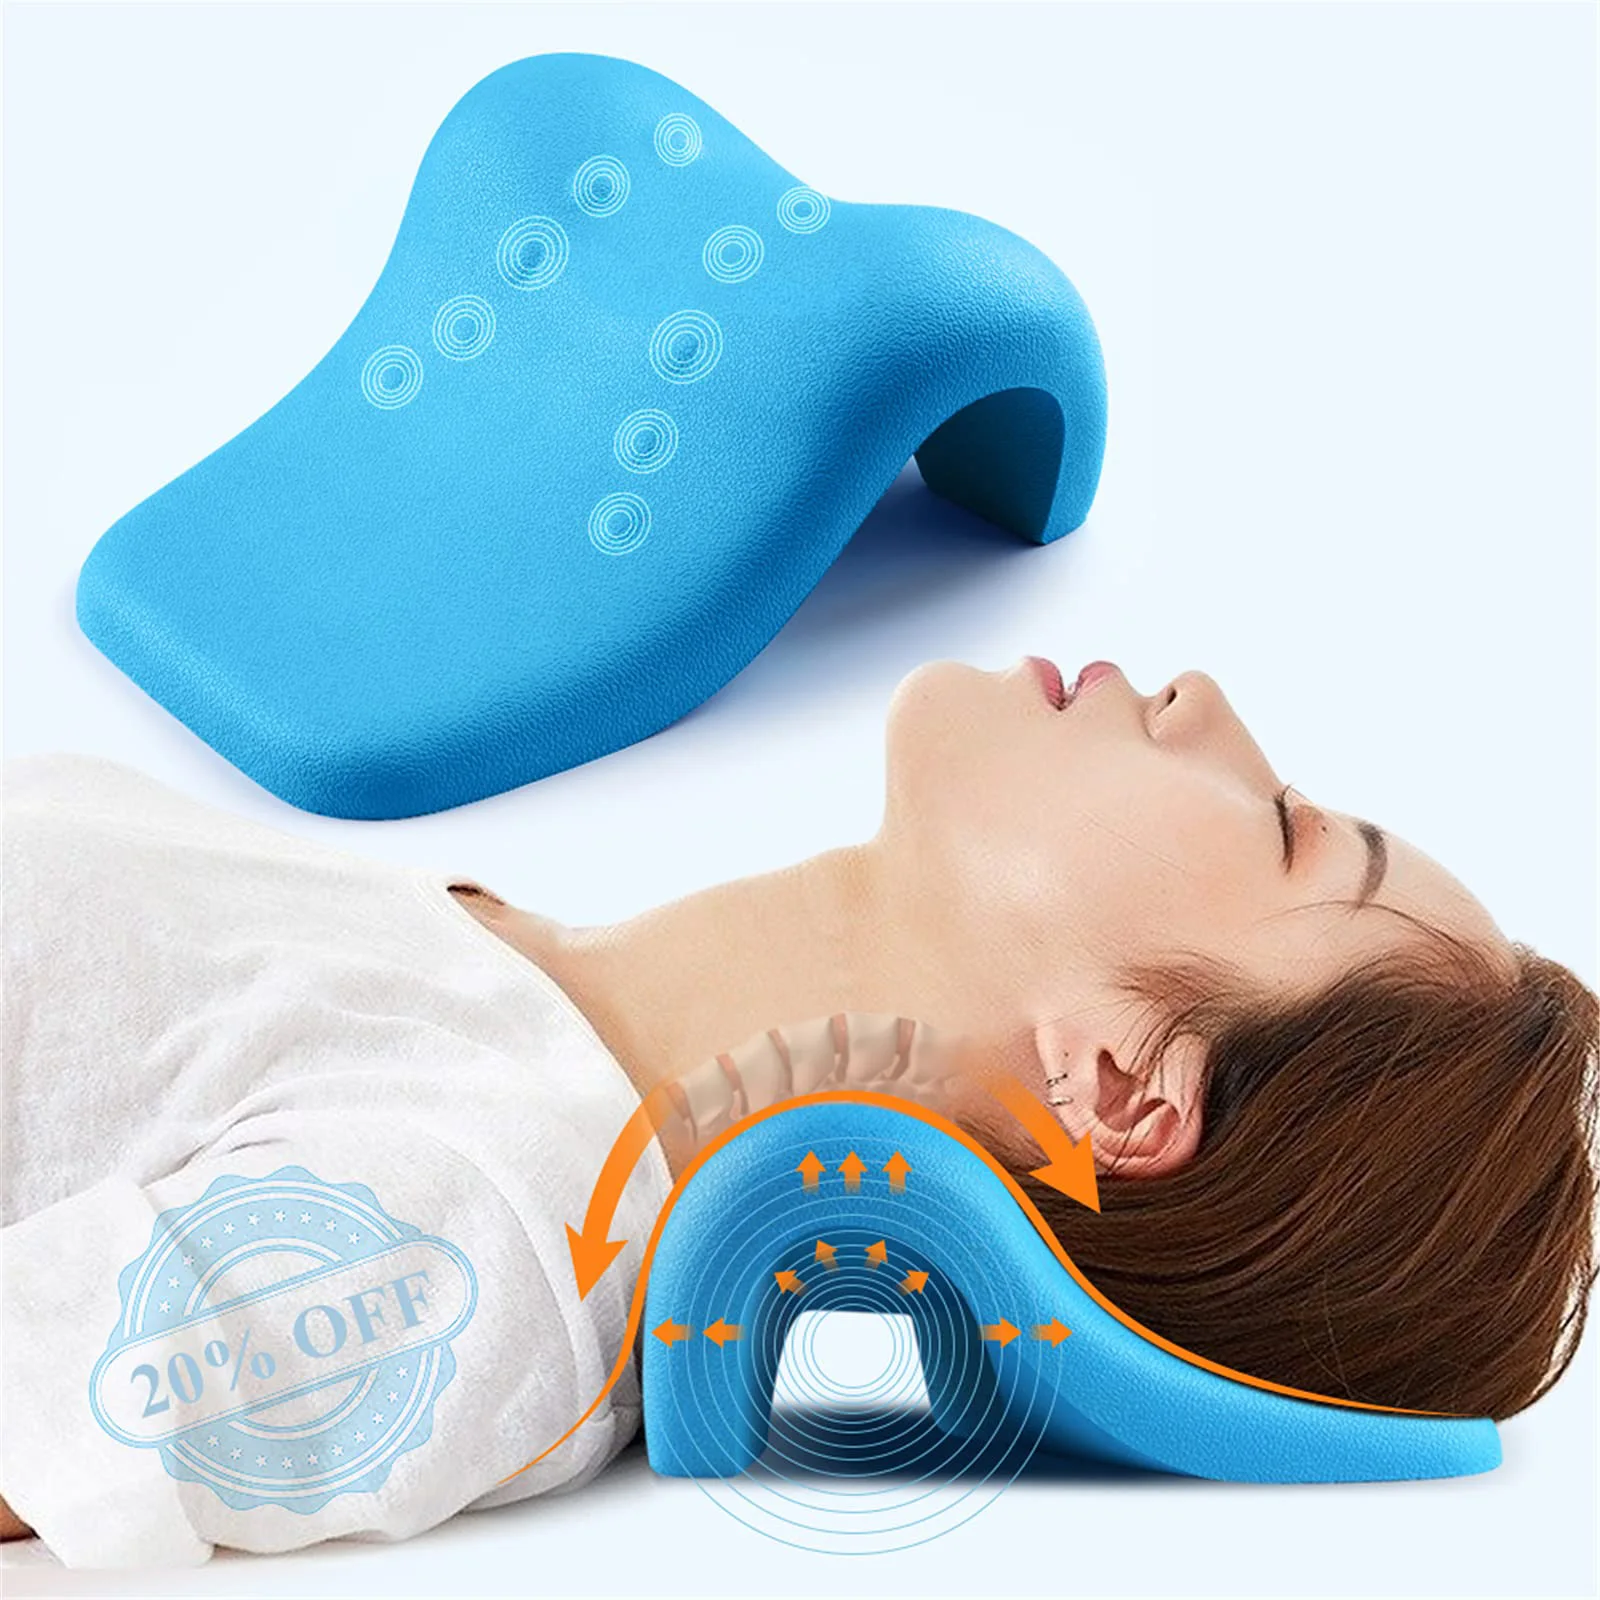 

Neck Stretcher,Pain Relief,Shoulder Relaxer,Cervical Traction Device Pillow,TMJ Pain Relief Spine Alignment,Chiropractic Pillow